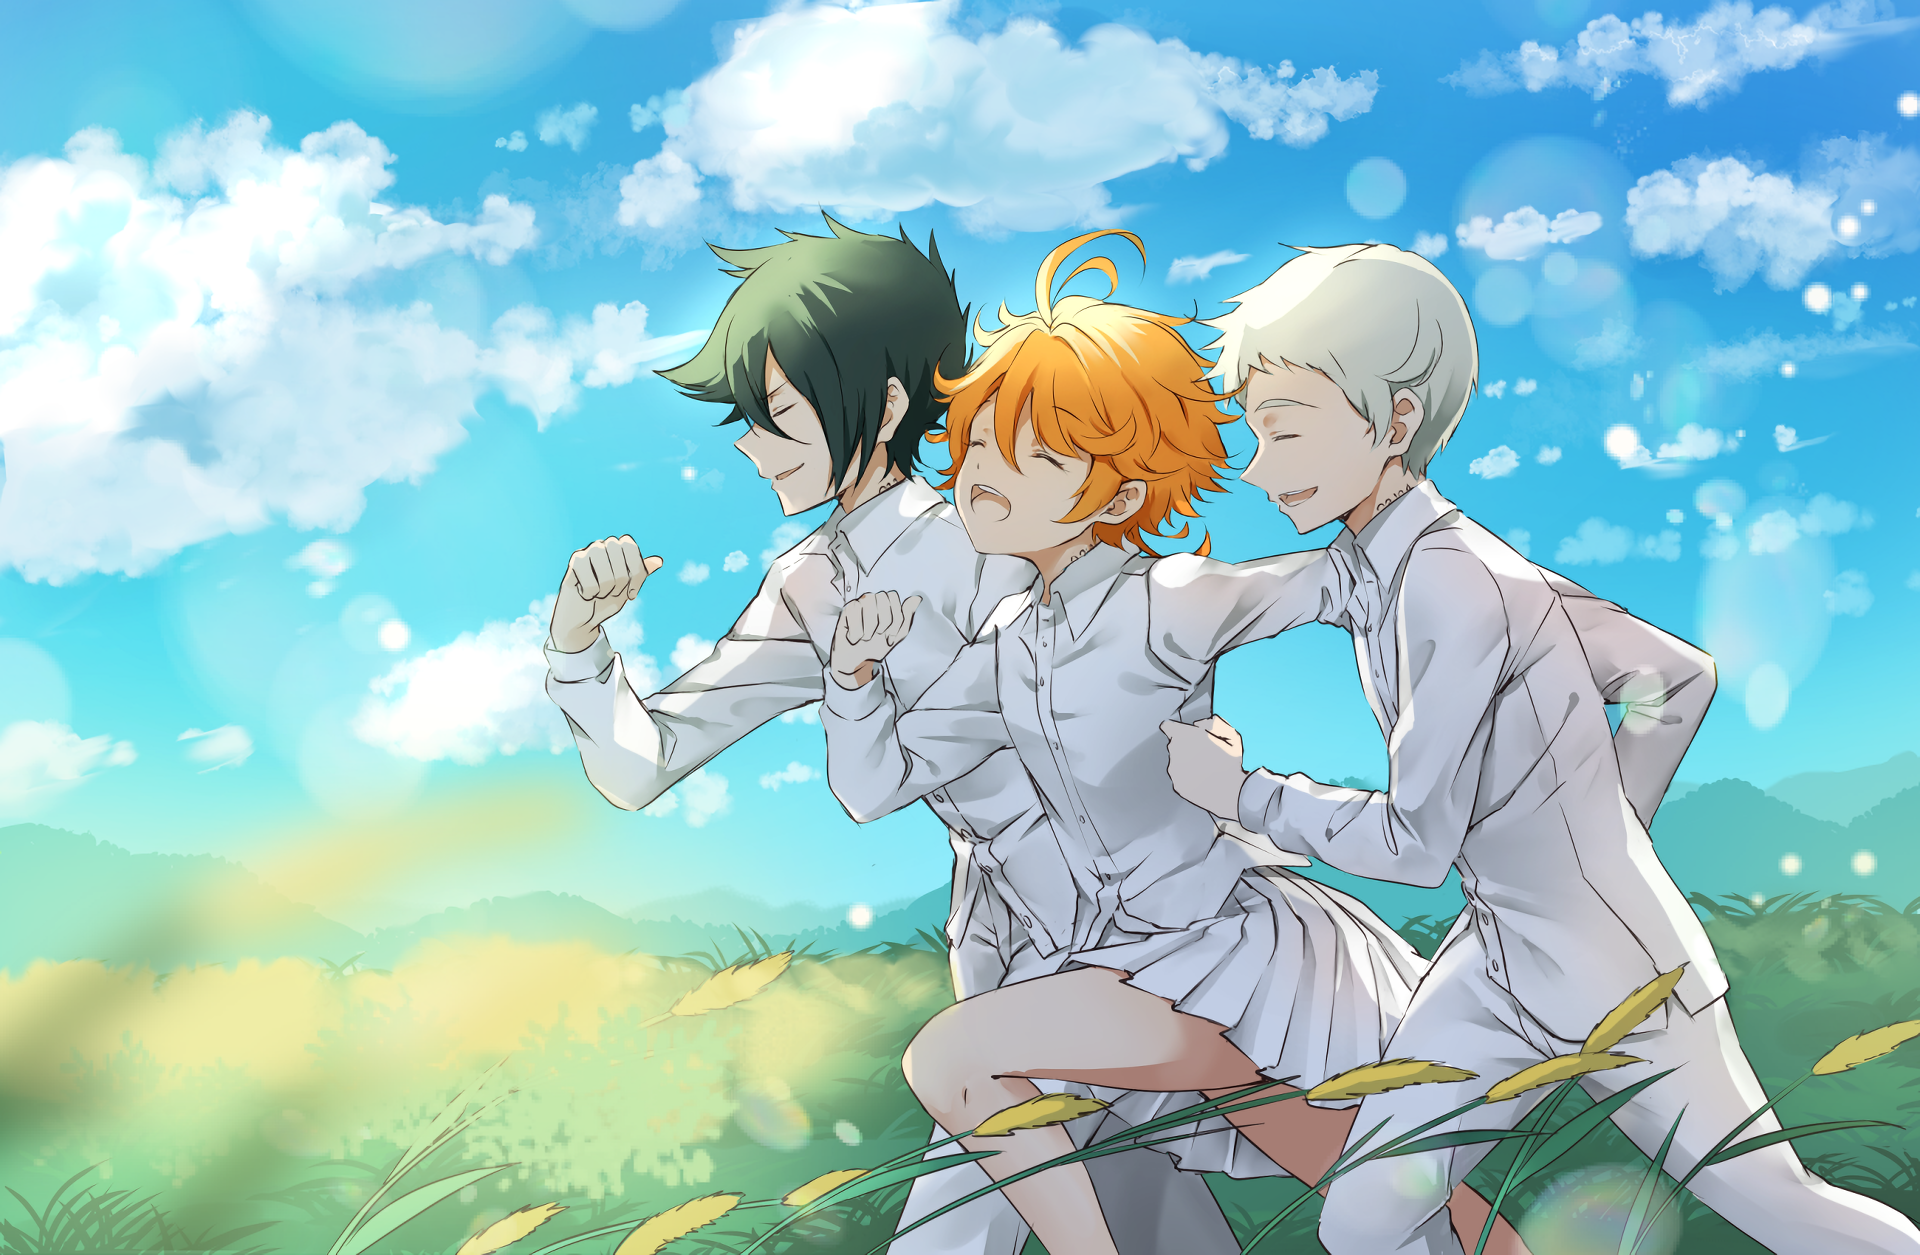 40+ Ray (The Promised Neverland) HD Wallpapers and Backgrounds